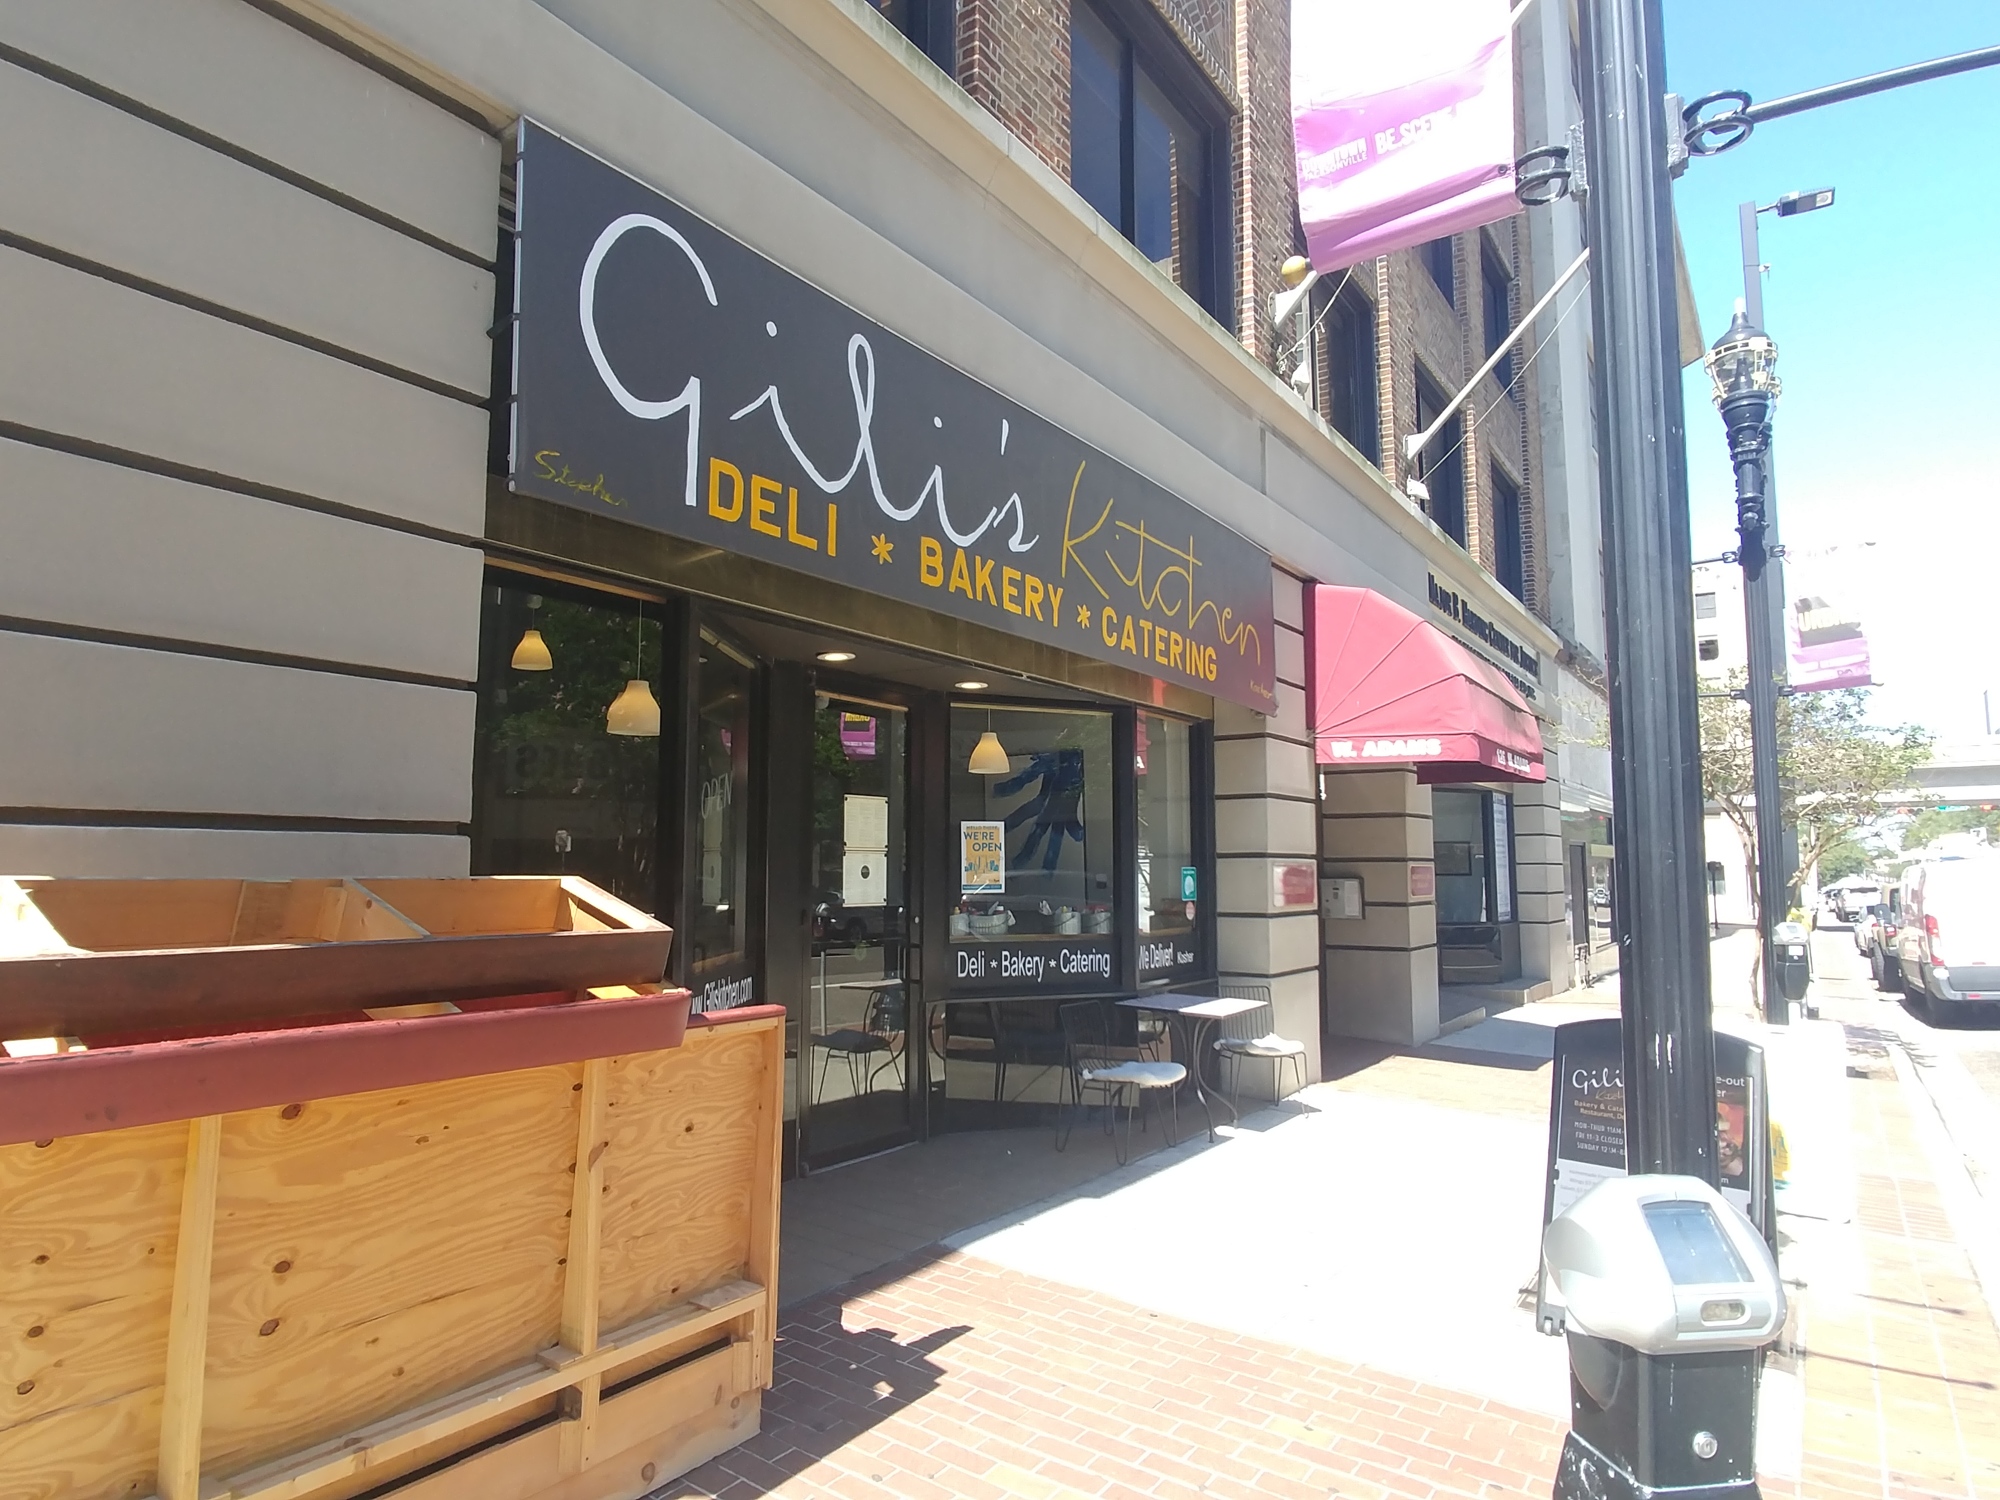 At Gili’s Kitchen Catering and Bakery, co-owner Ricki Ben Simon said “it feels like the first day when we opened.”